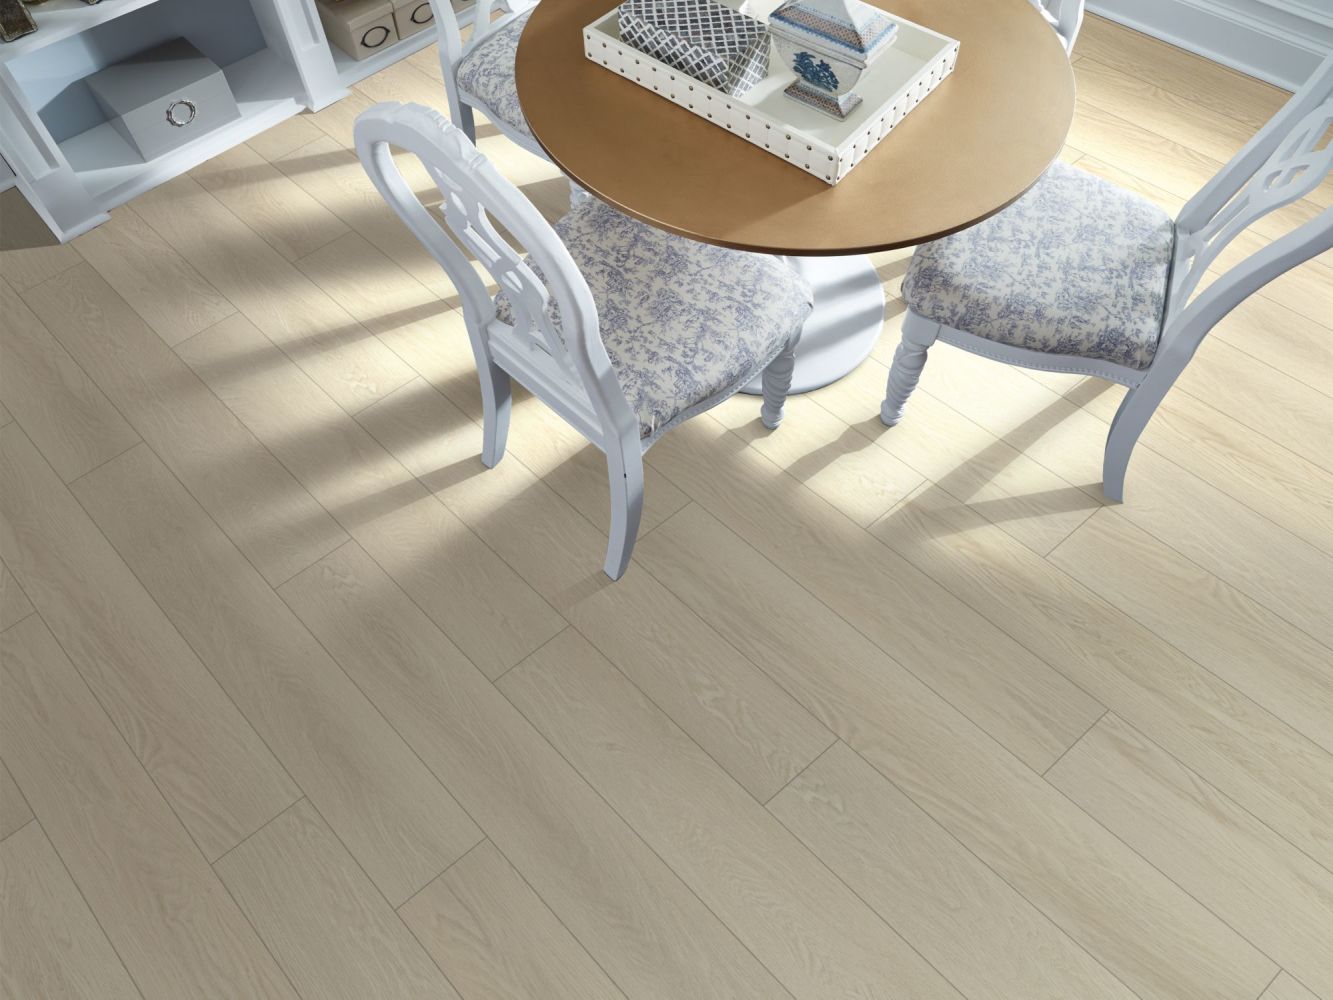 Shaw Floors Resilient Property Solutions Prominence Plus Wheat Oak 01025_VE381